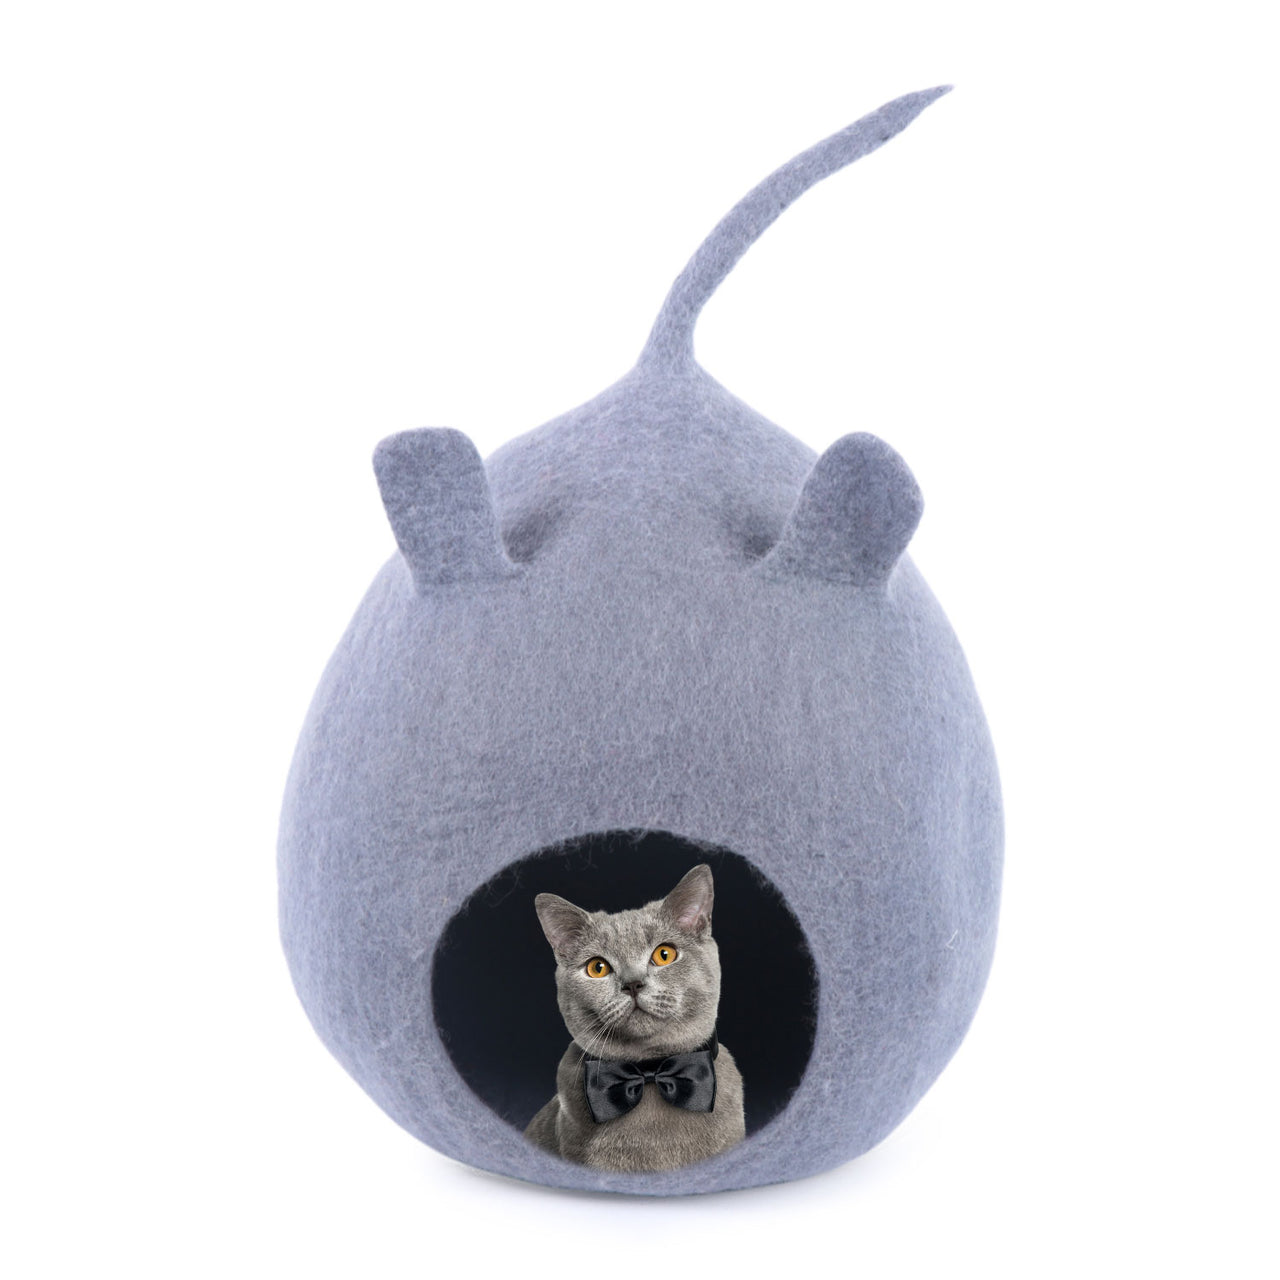 Feltcave Cat Cave Bed, Handmade from Wool, Enclosed Cat Bed, Cat Pod, Cat Dome Nest Hiding Place, Cozy Hideout Cat Igloo Pod for Indoor Cats